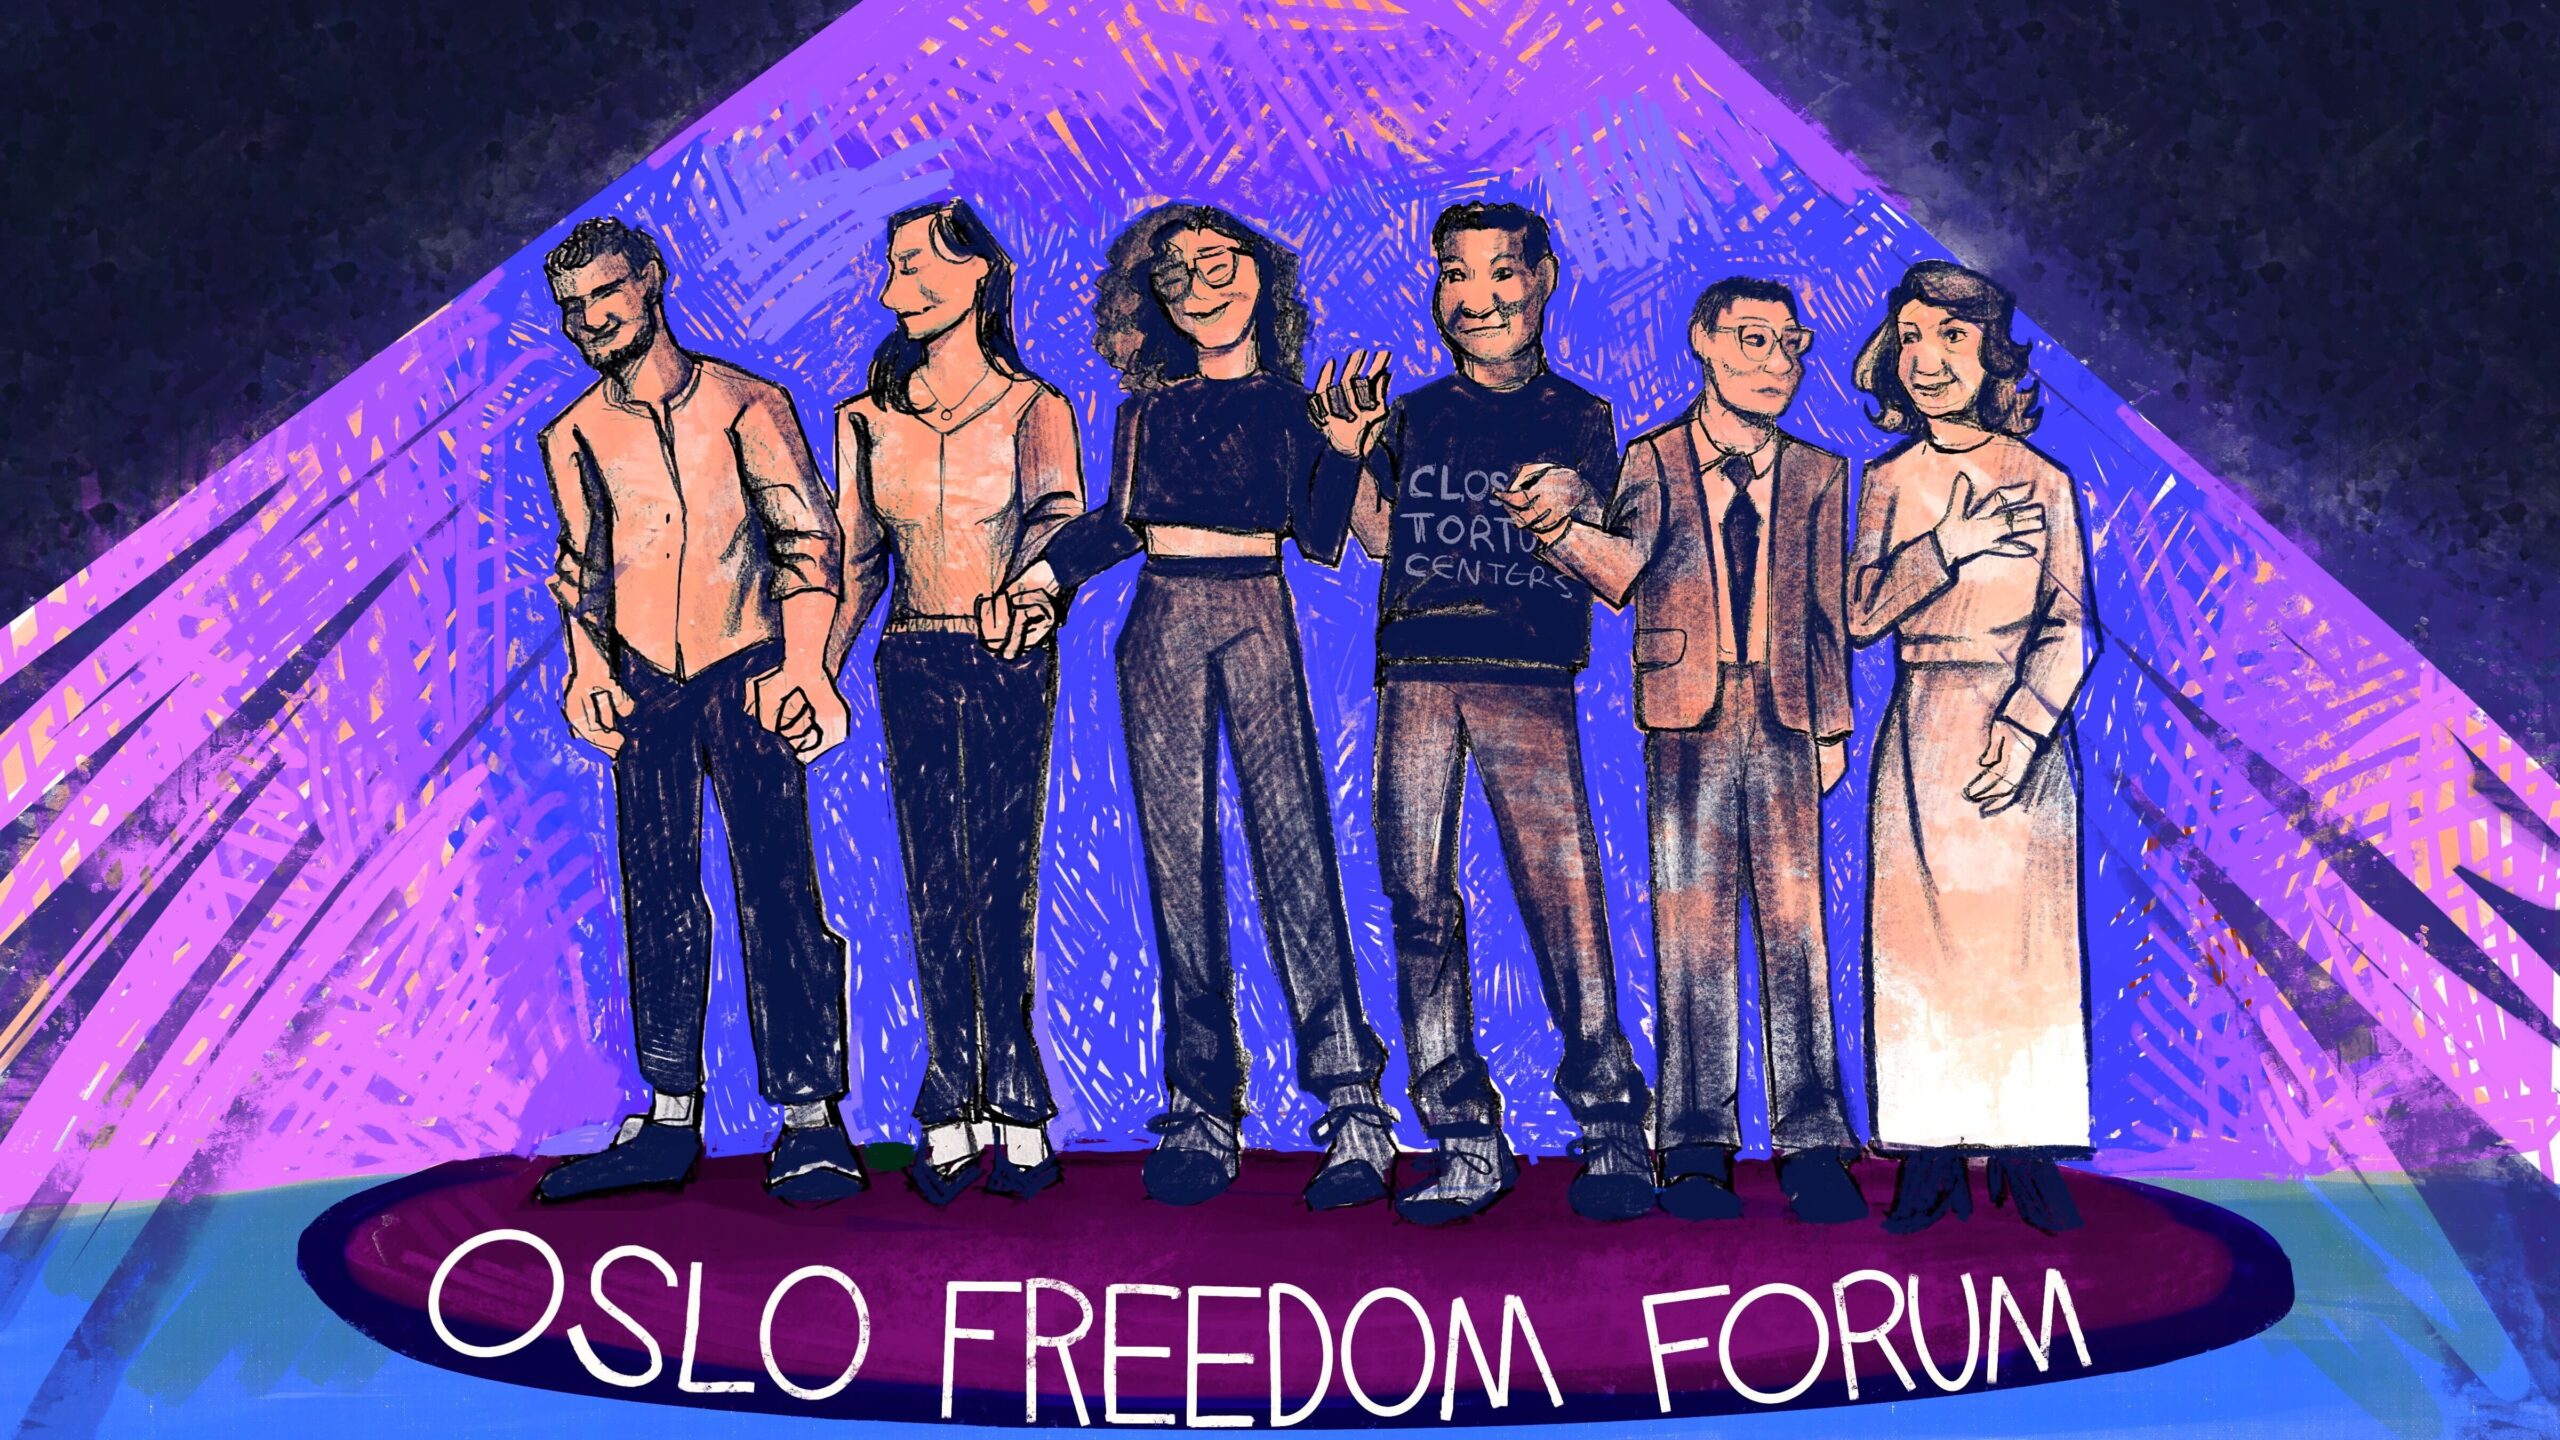 Six illustrated figures of people stand in front of a purple background that imitates a spotlight on them. The text underneath the figures reads “Oslo Freedom Forum.”